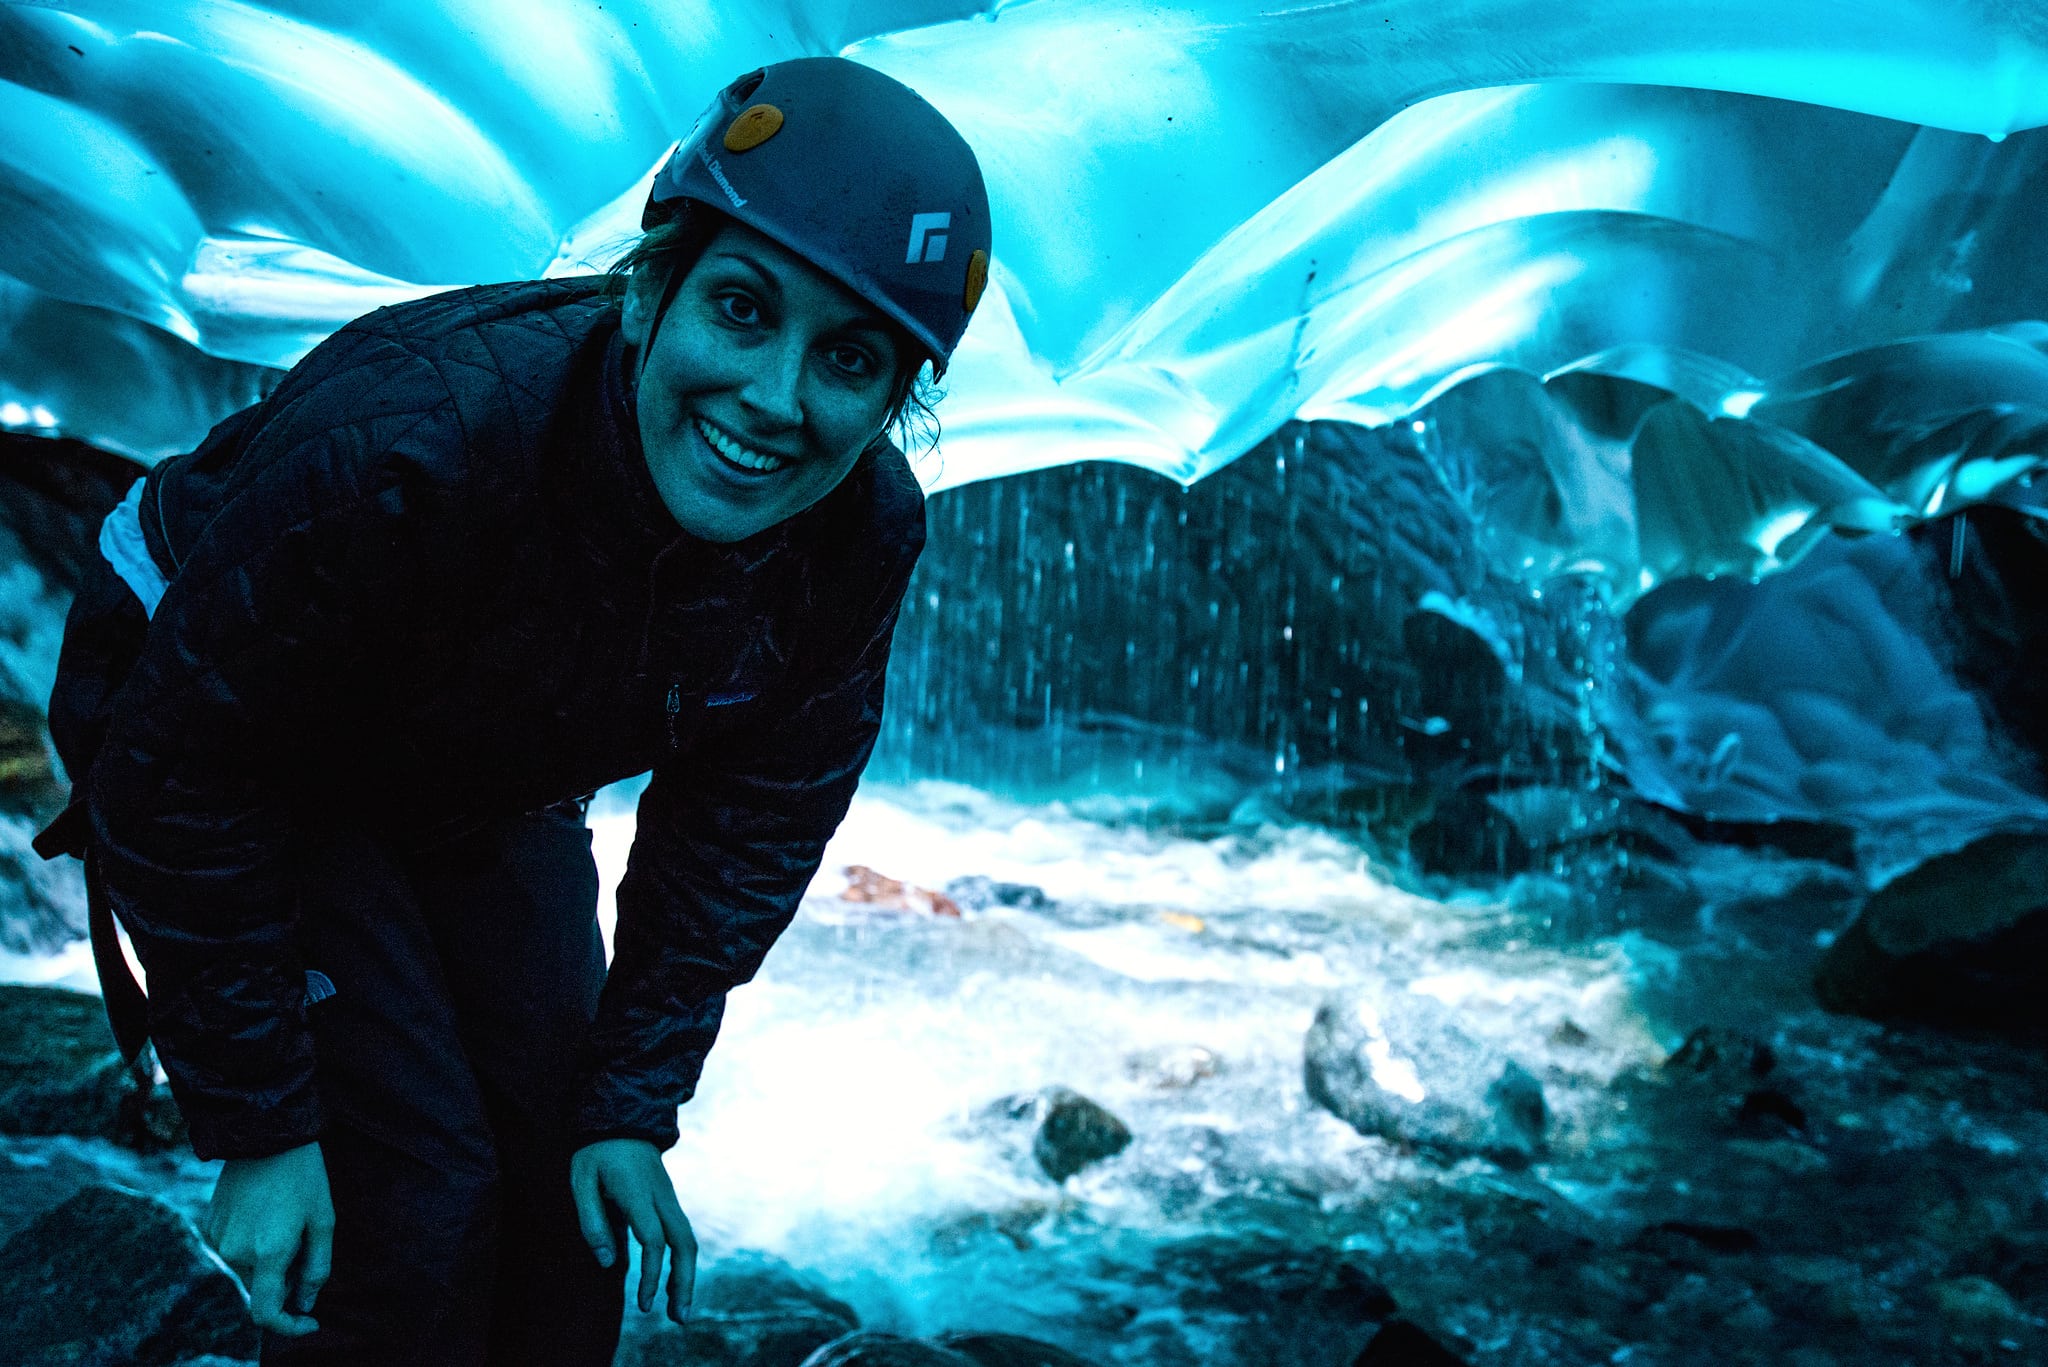 A tourist looks inside a cave in the Mendenhall Glacier in Juneau, Alaska.